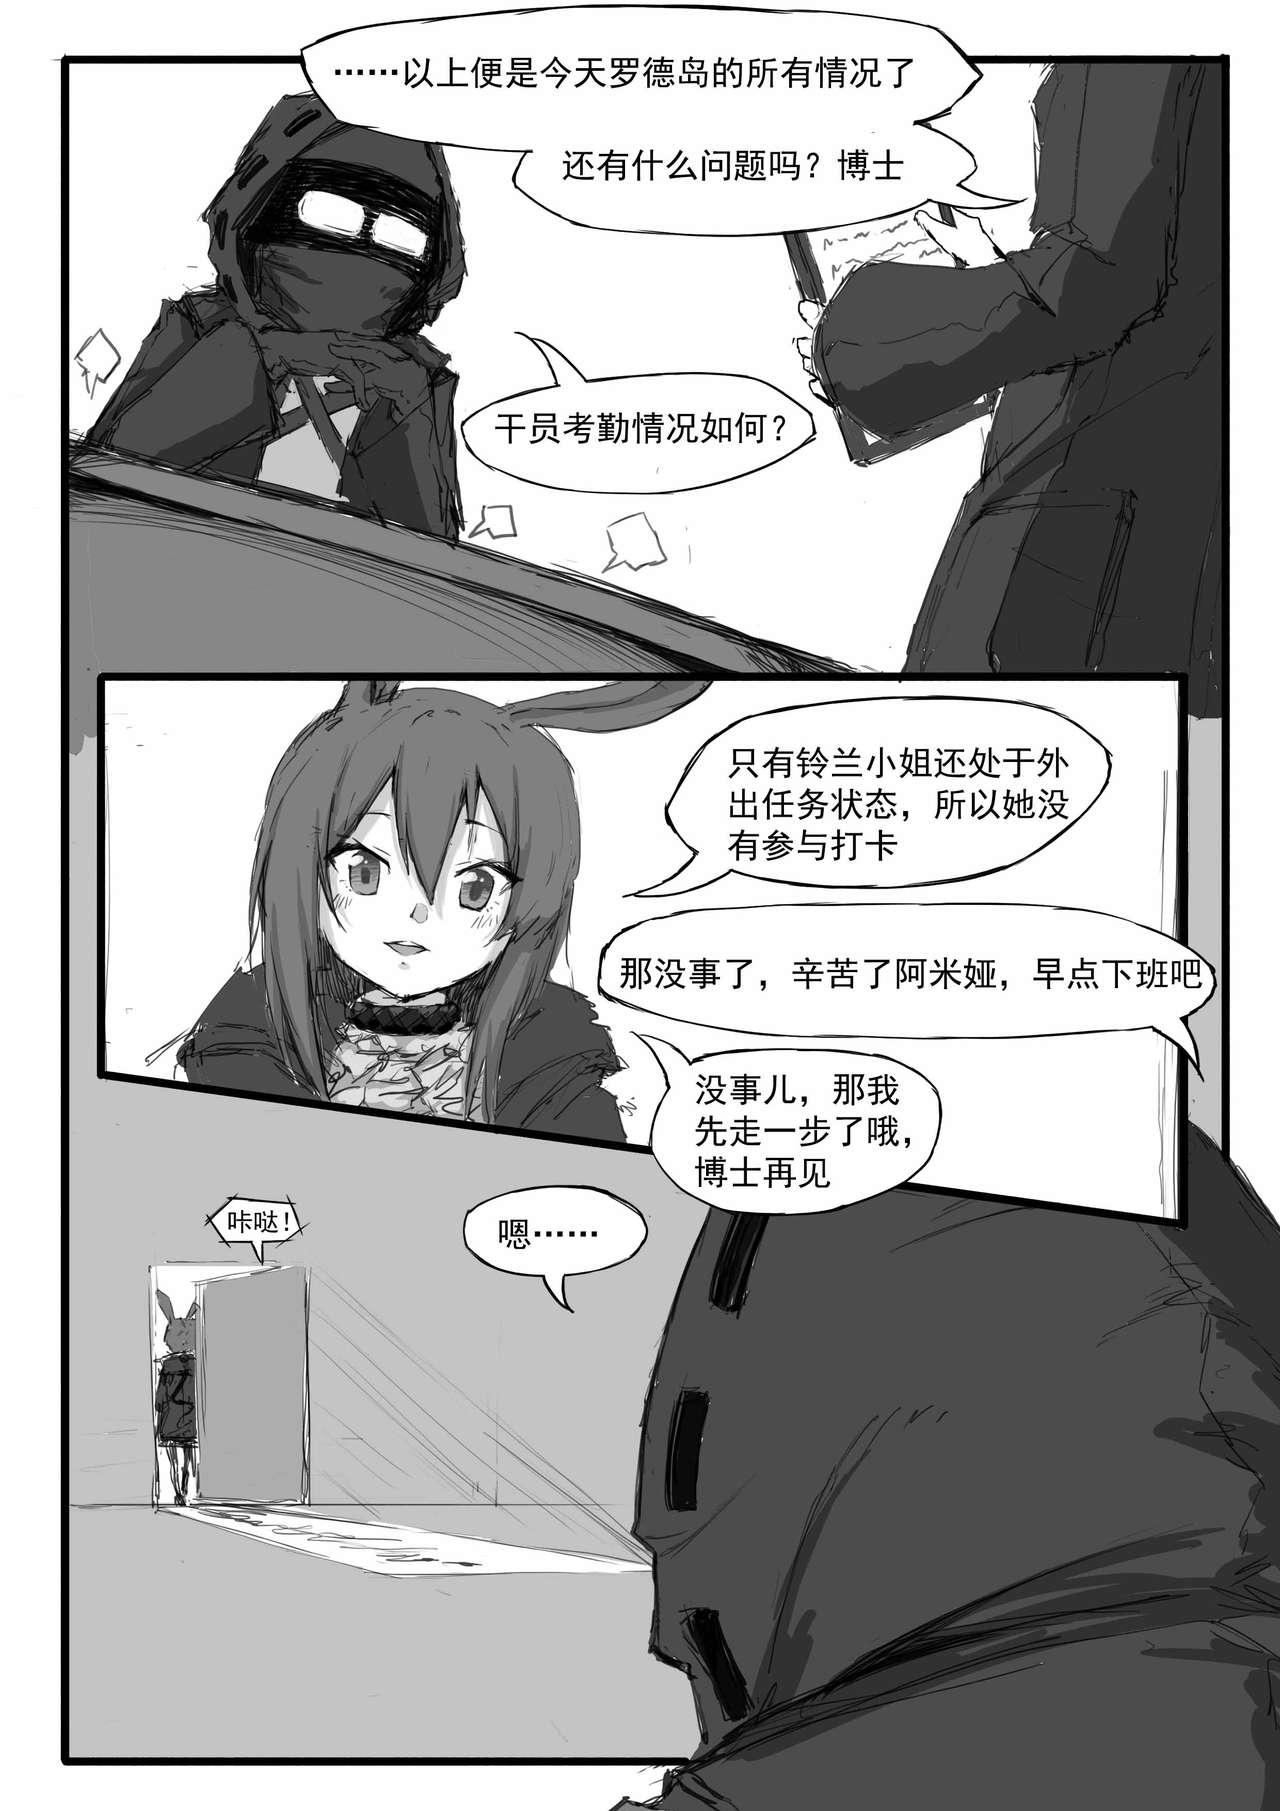 Beach 铃兰的单人任务 - Arknights Blowjob Contest - Page 2